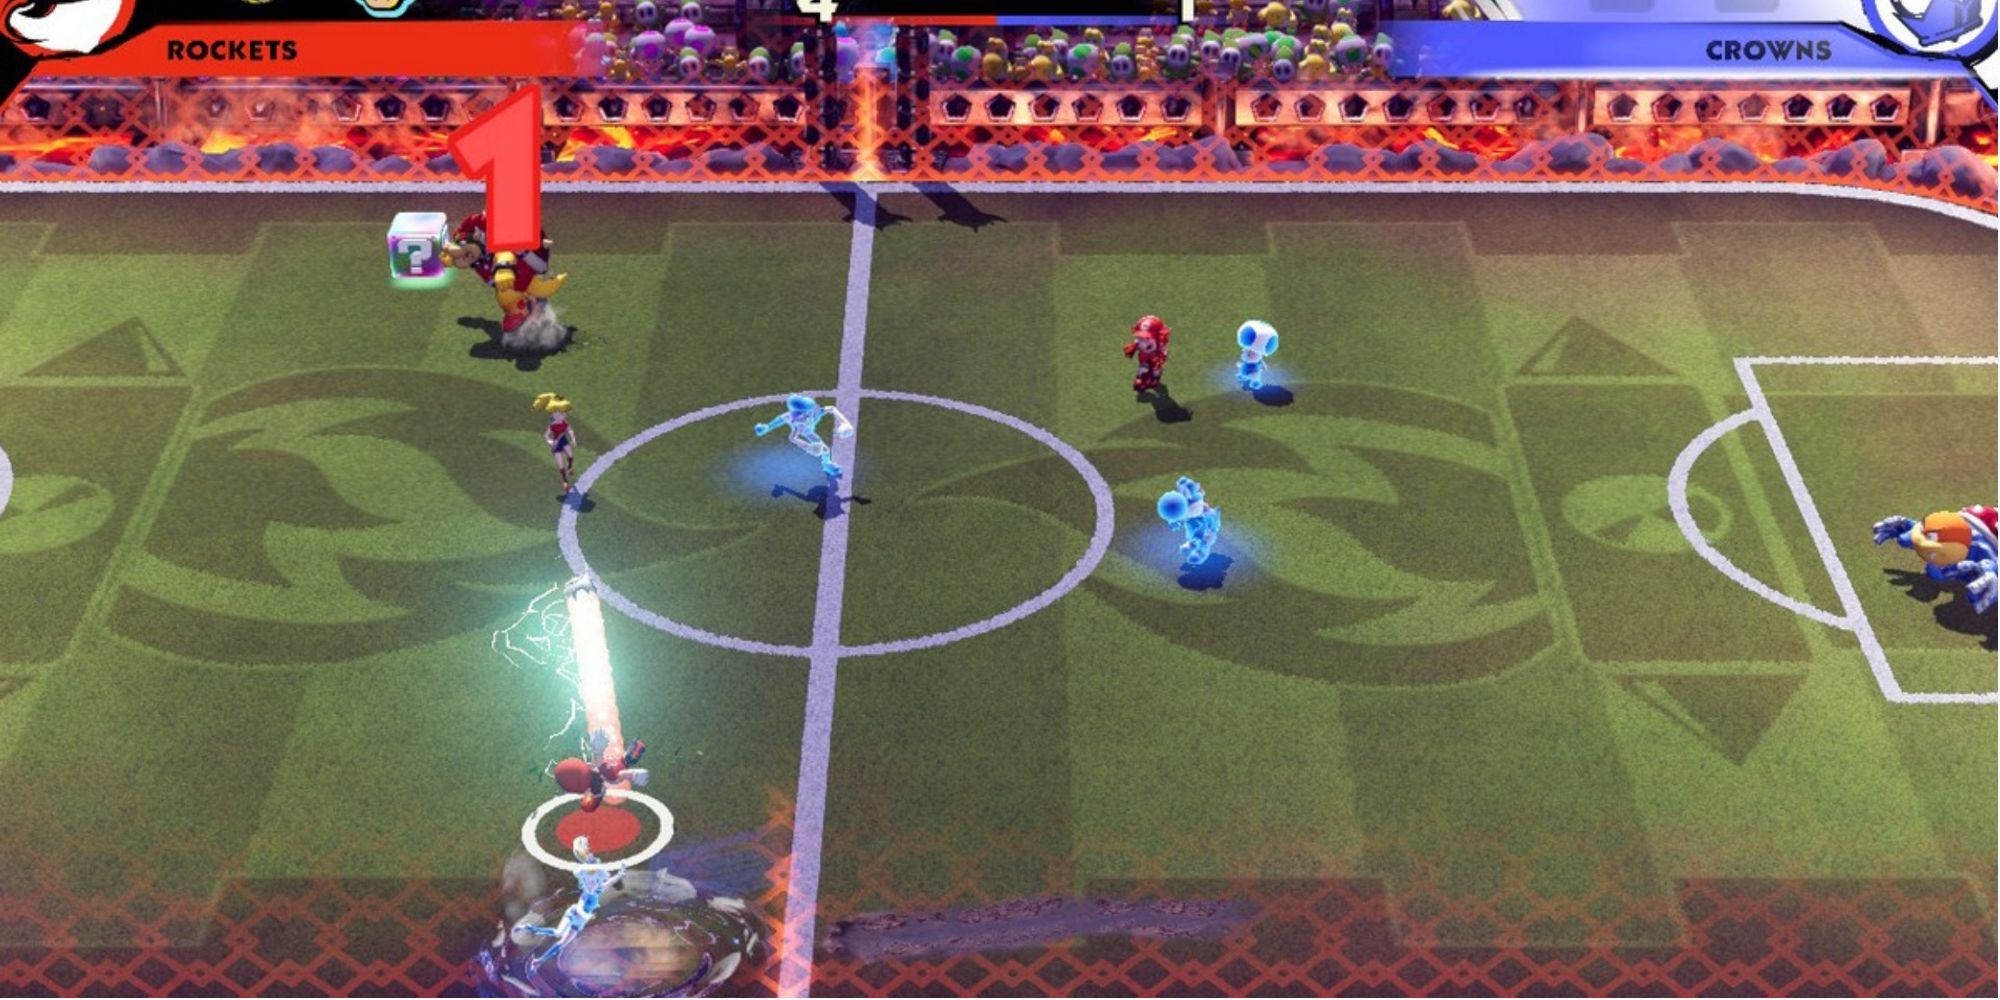 Mario Strikers passing and positioning leads to wins